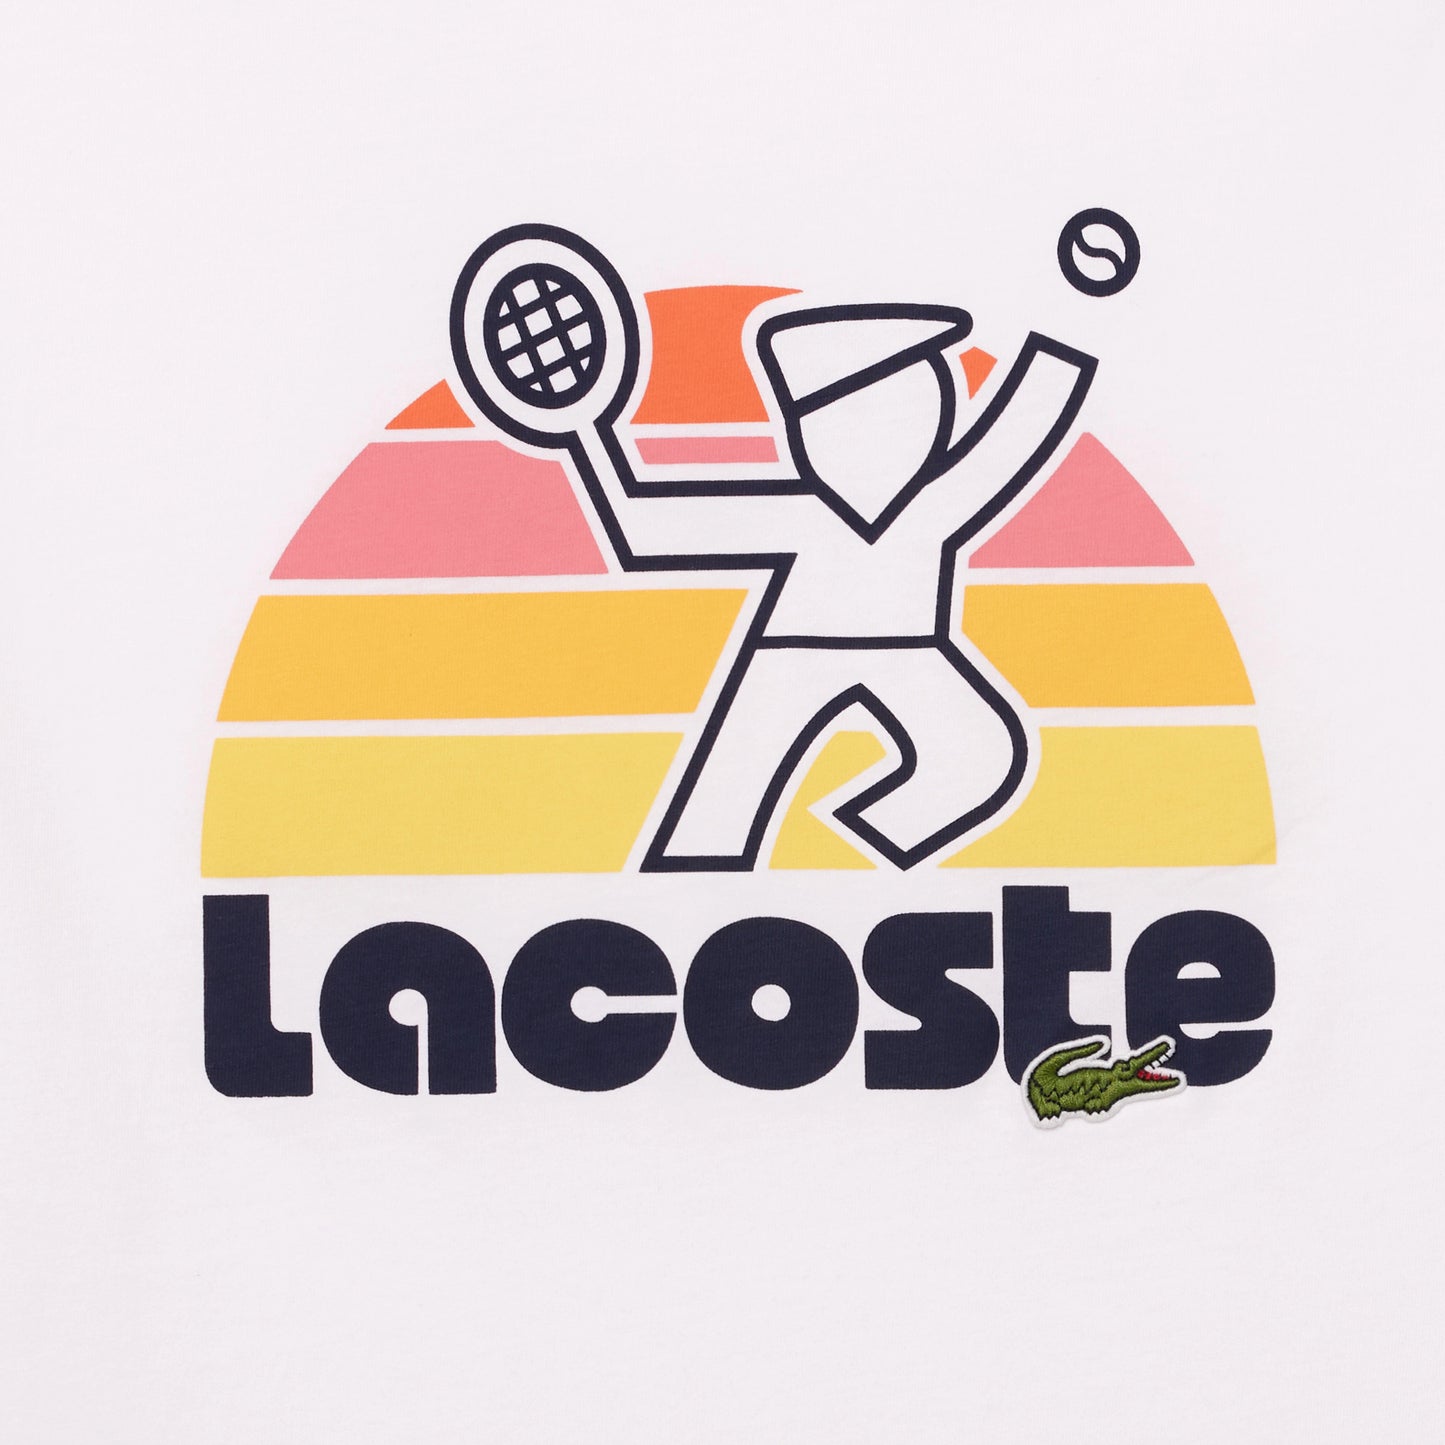 LACOSTE Men's Washed Effect Tennis Print T-shirt- White